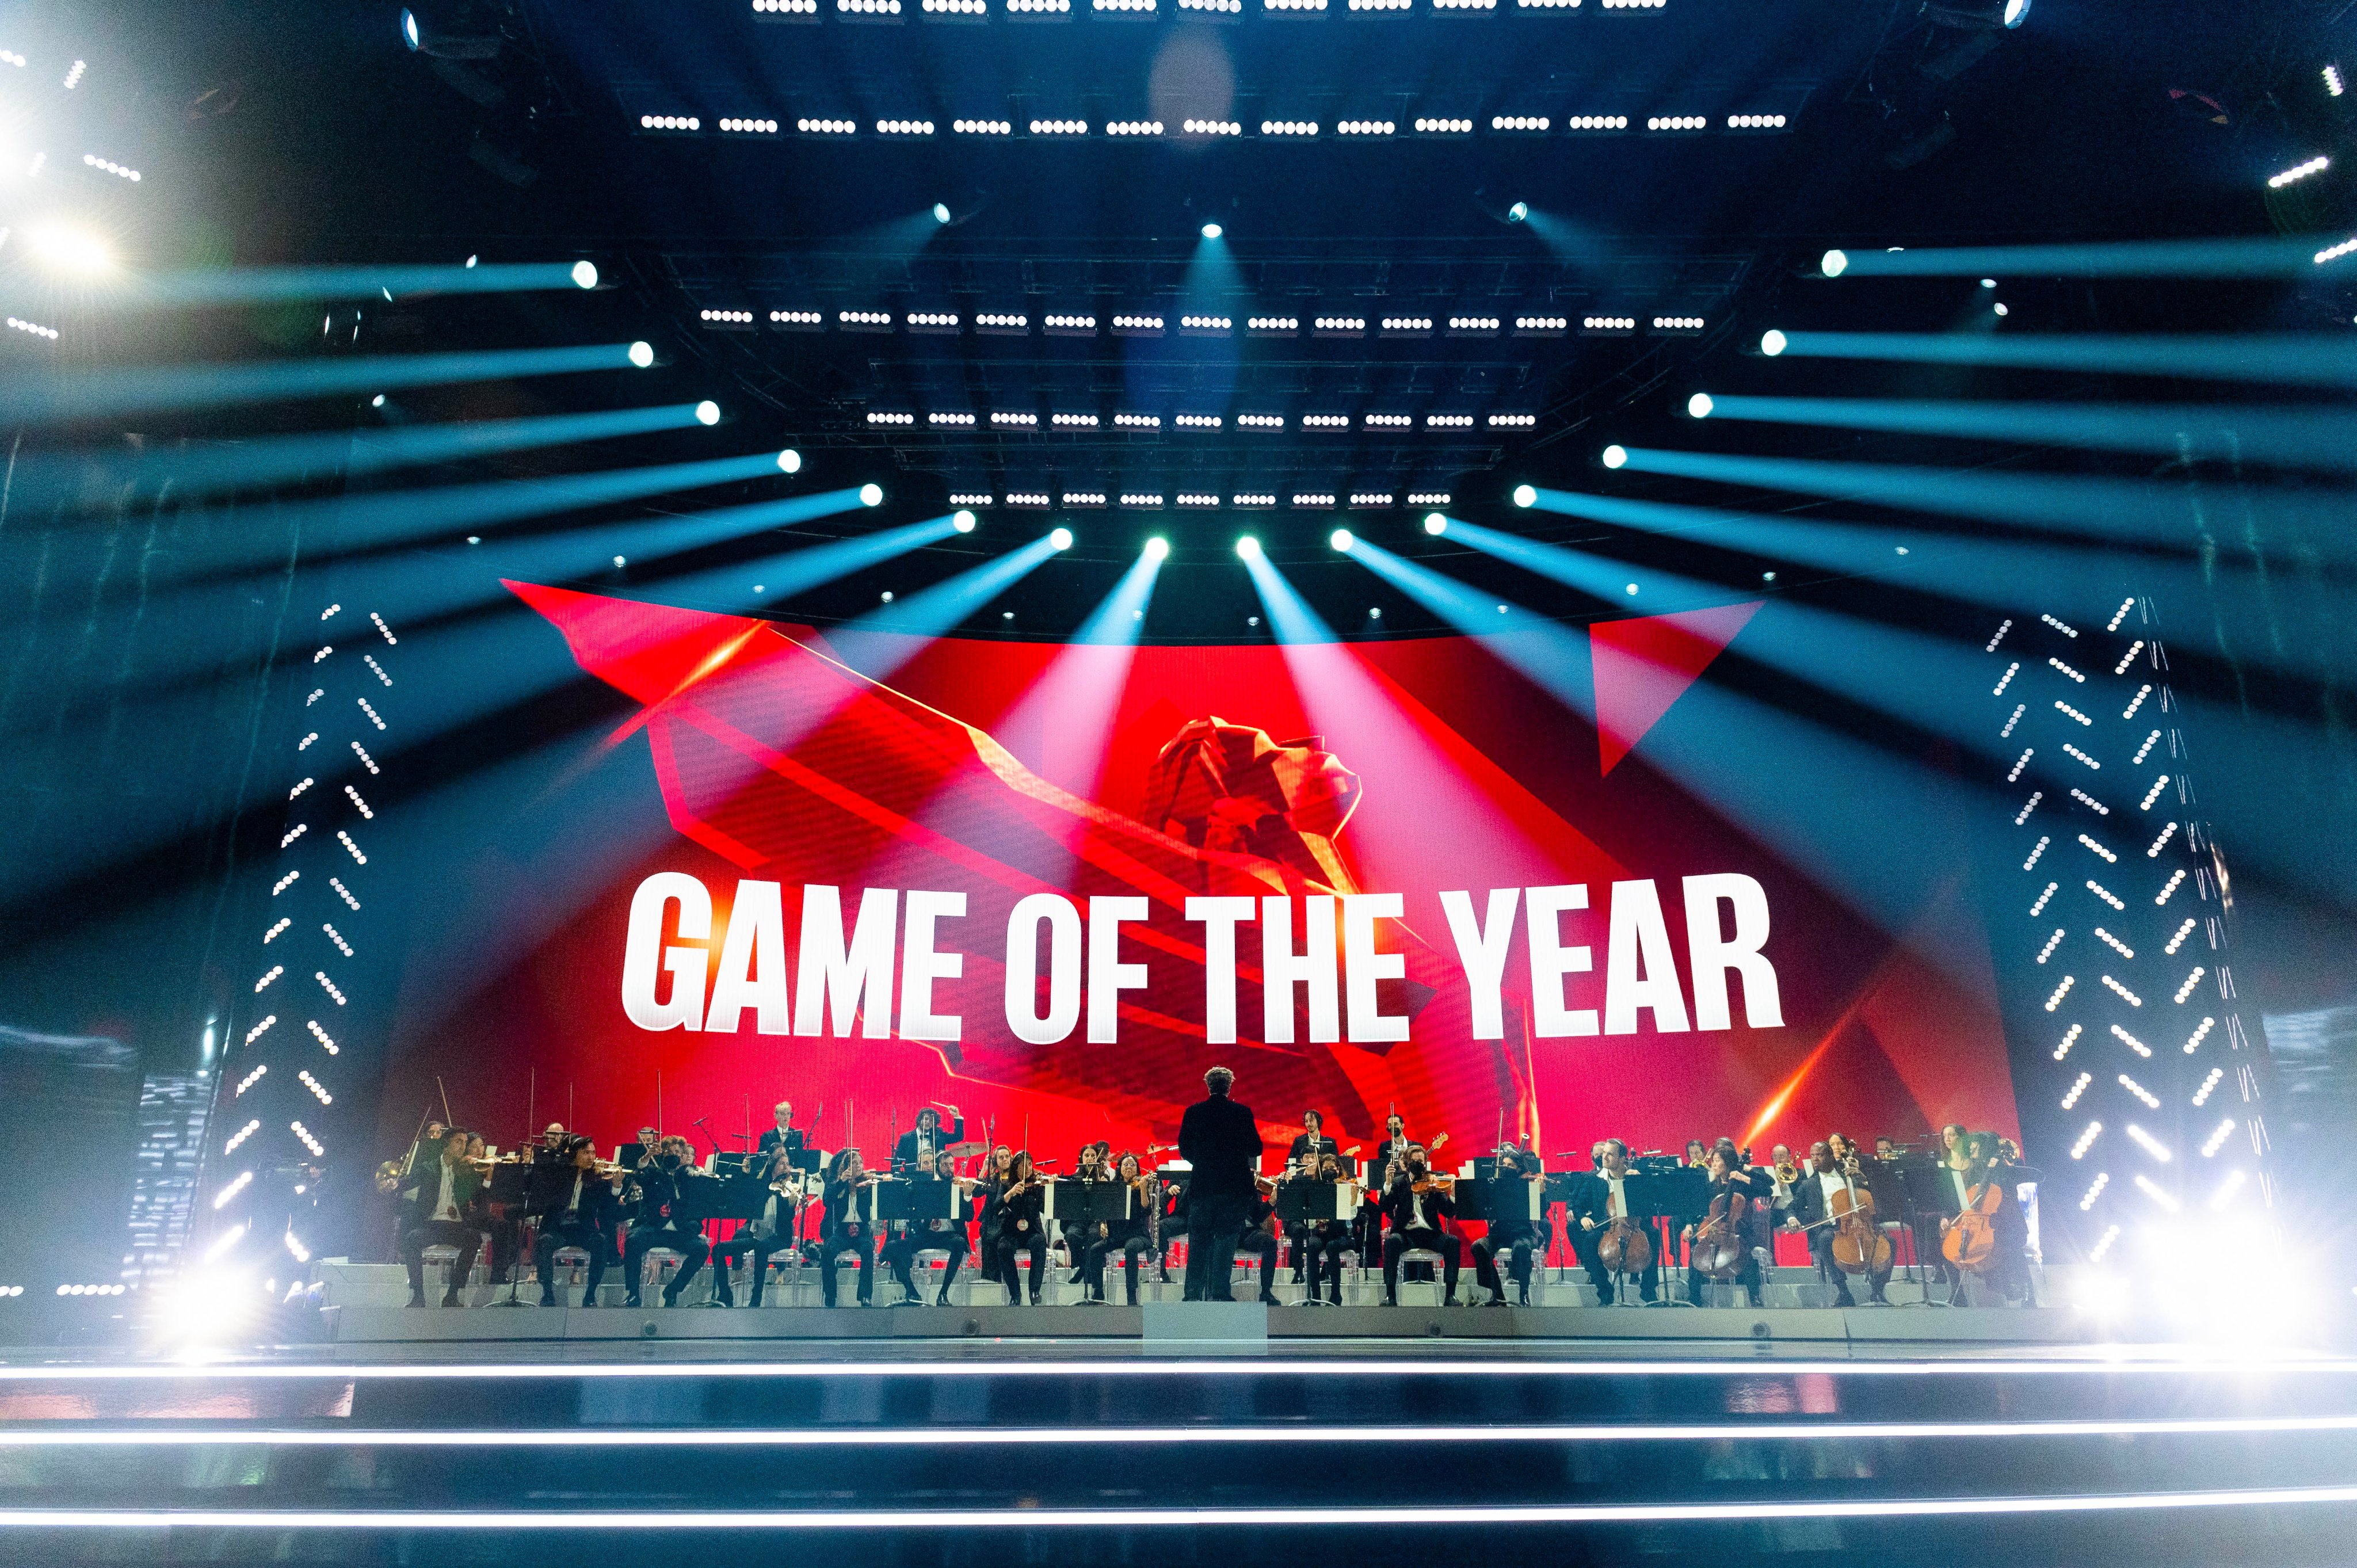 The Game Awards on X: You have voted in record setting numbers on  #TheGameAwards 35 million in the first 7 days -- more than double last  year's first week. Keep voting, polls